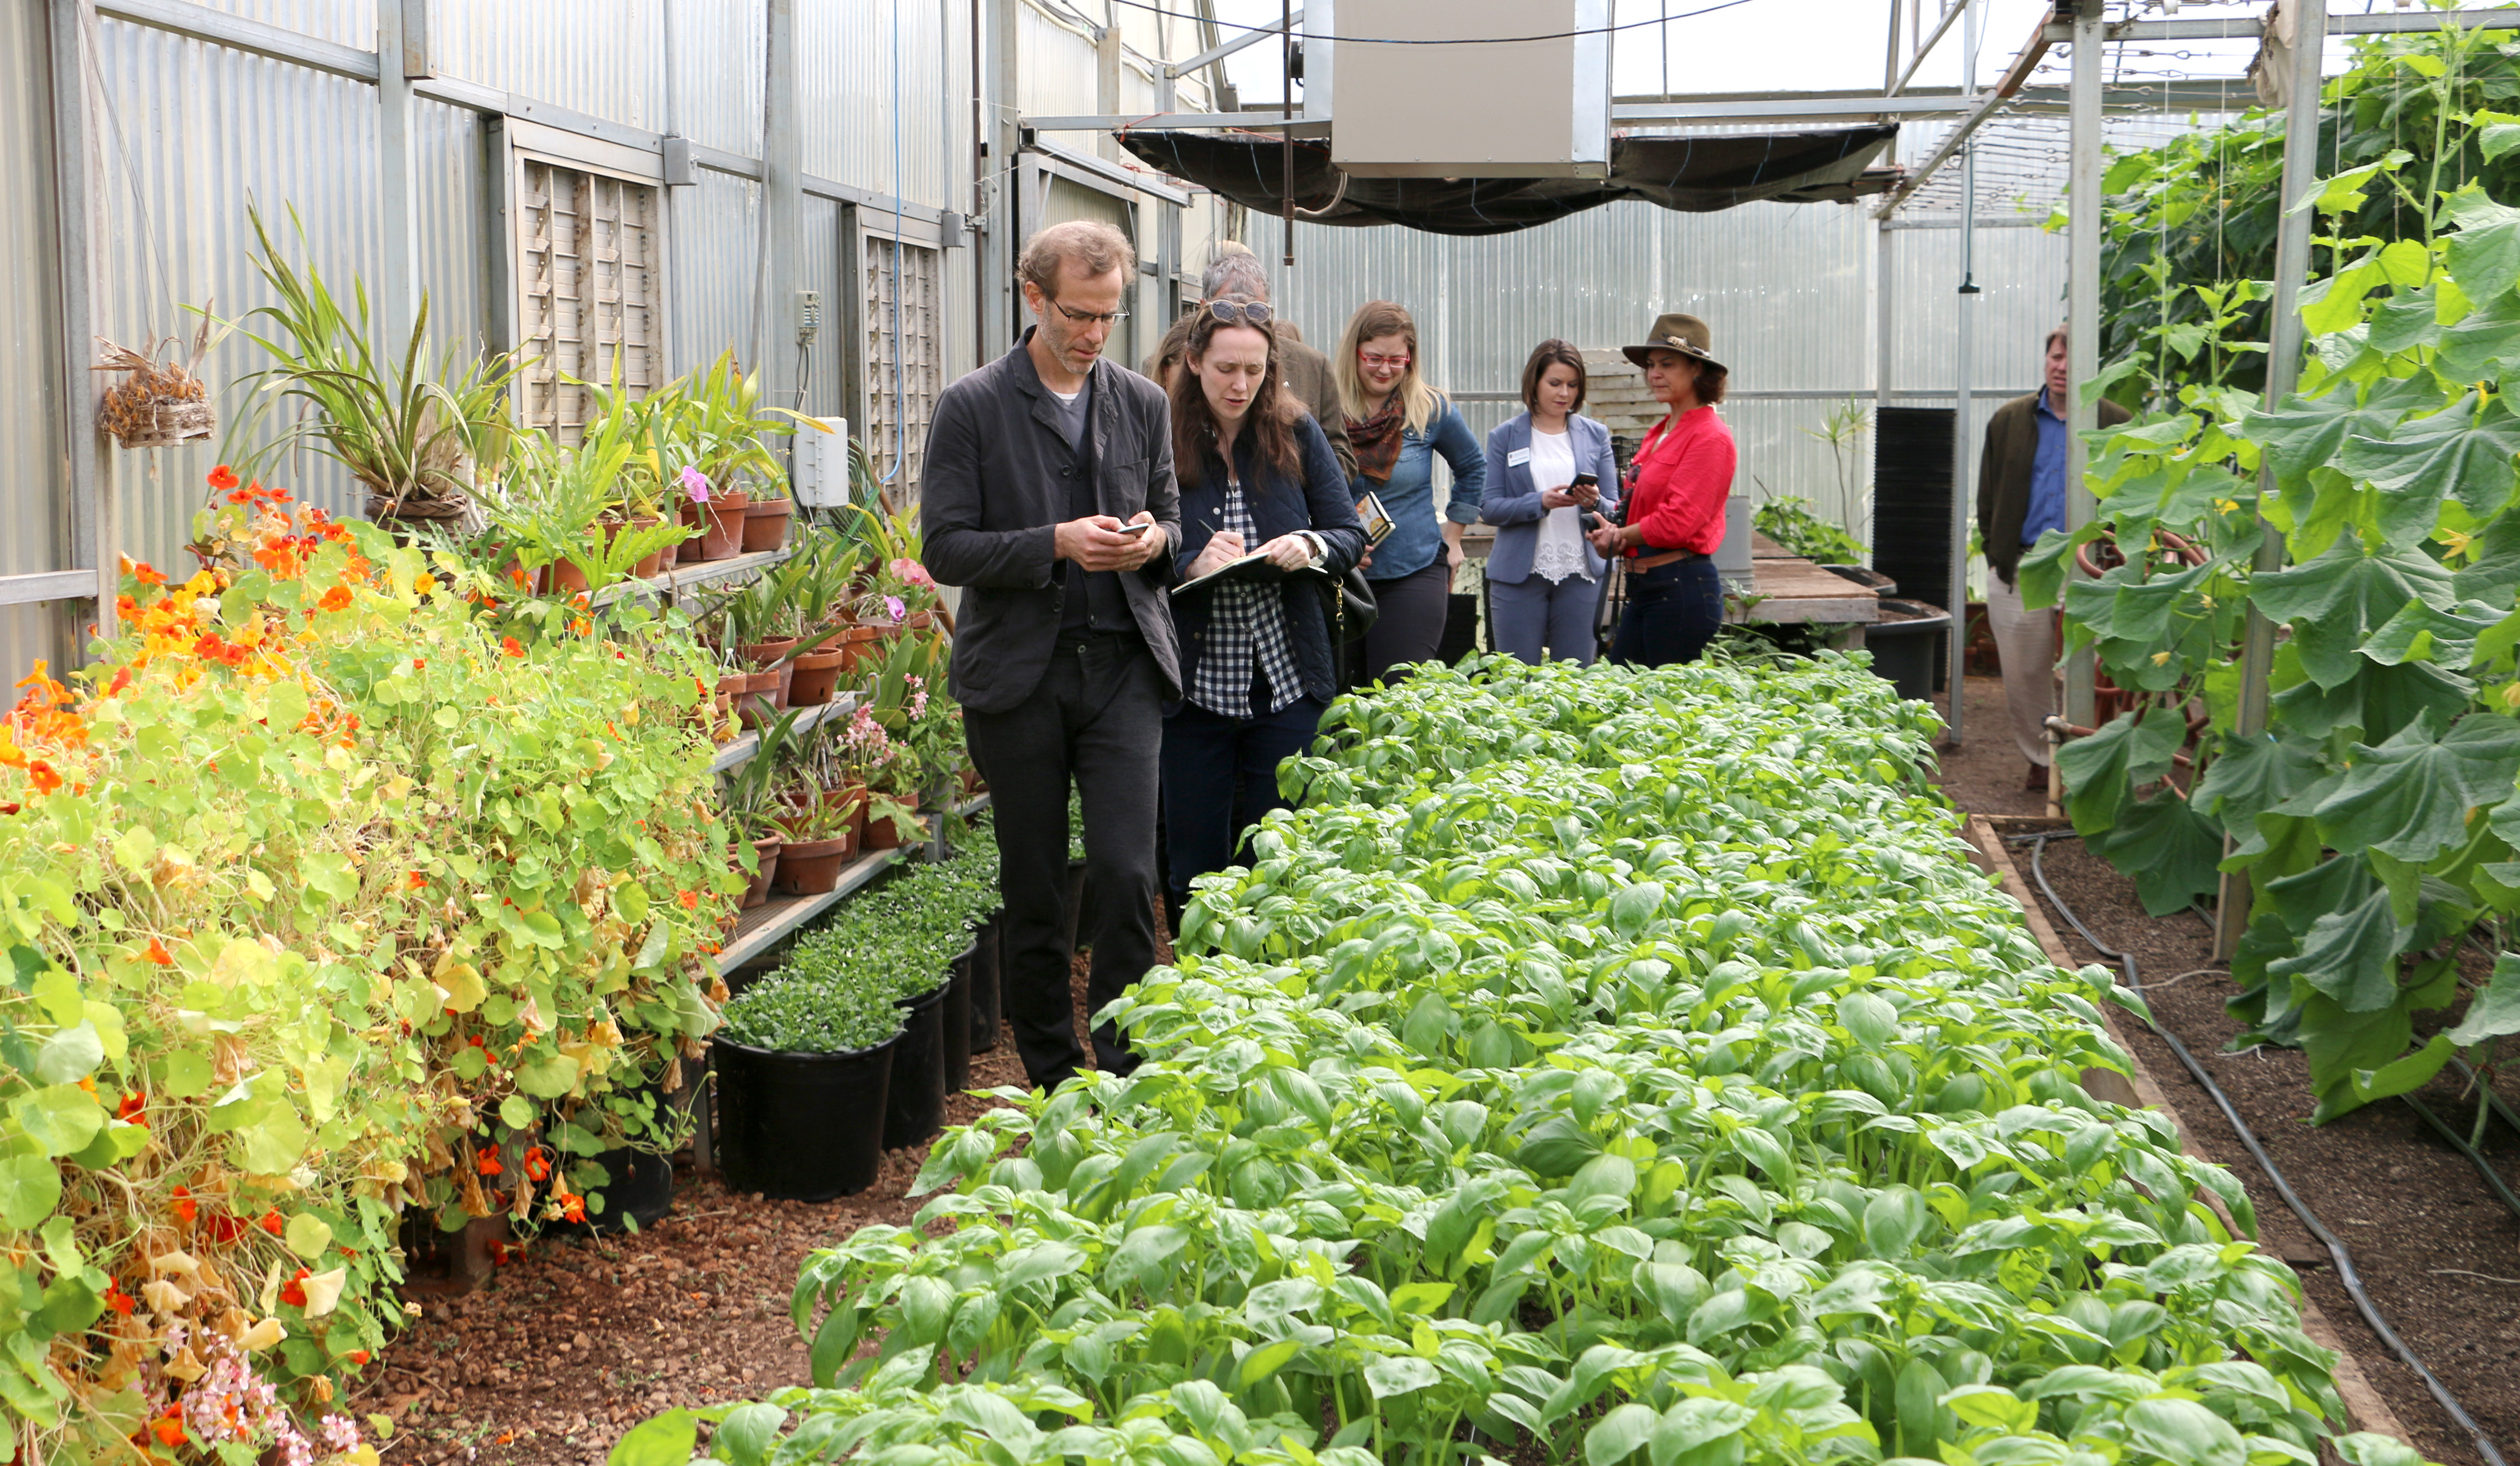 Chef Aims To Nurture The Seeds Of A New Food System Uga Today